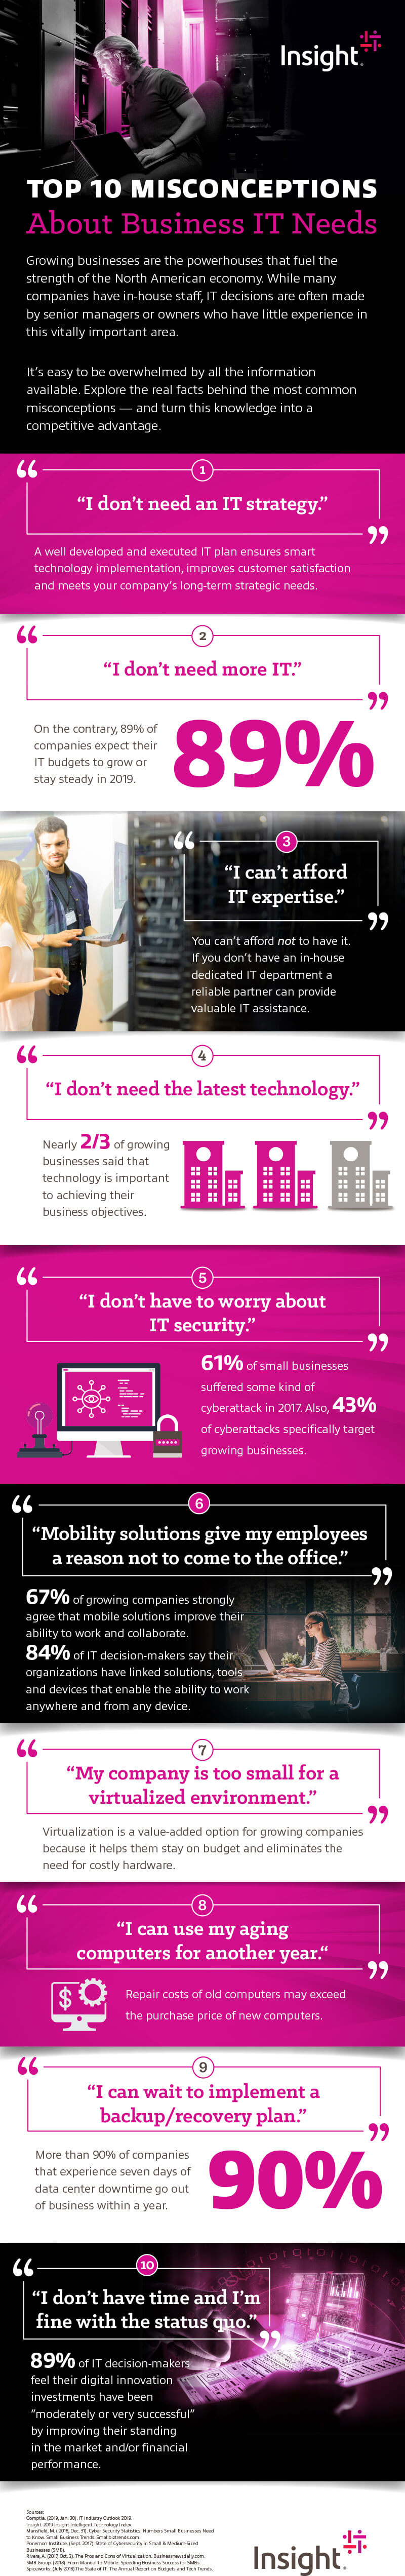 Infographic displaying Top 10 Misconceptions About Business IT Needs Translated below.